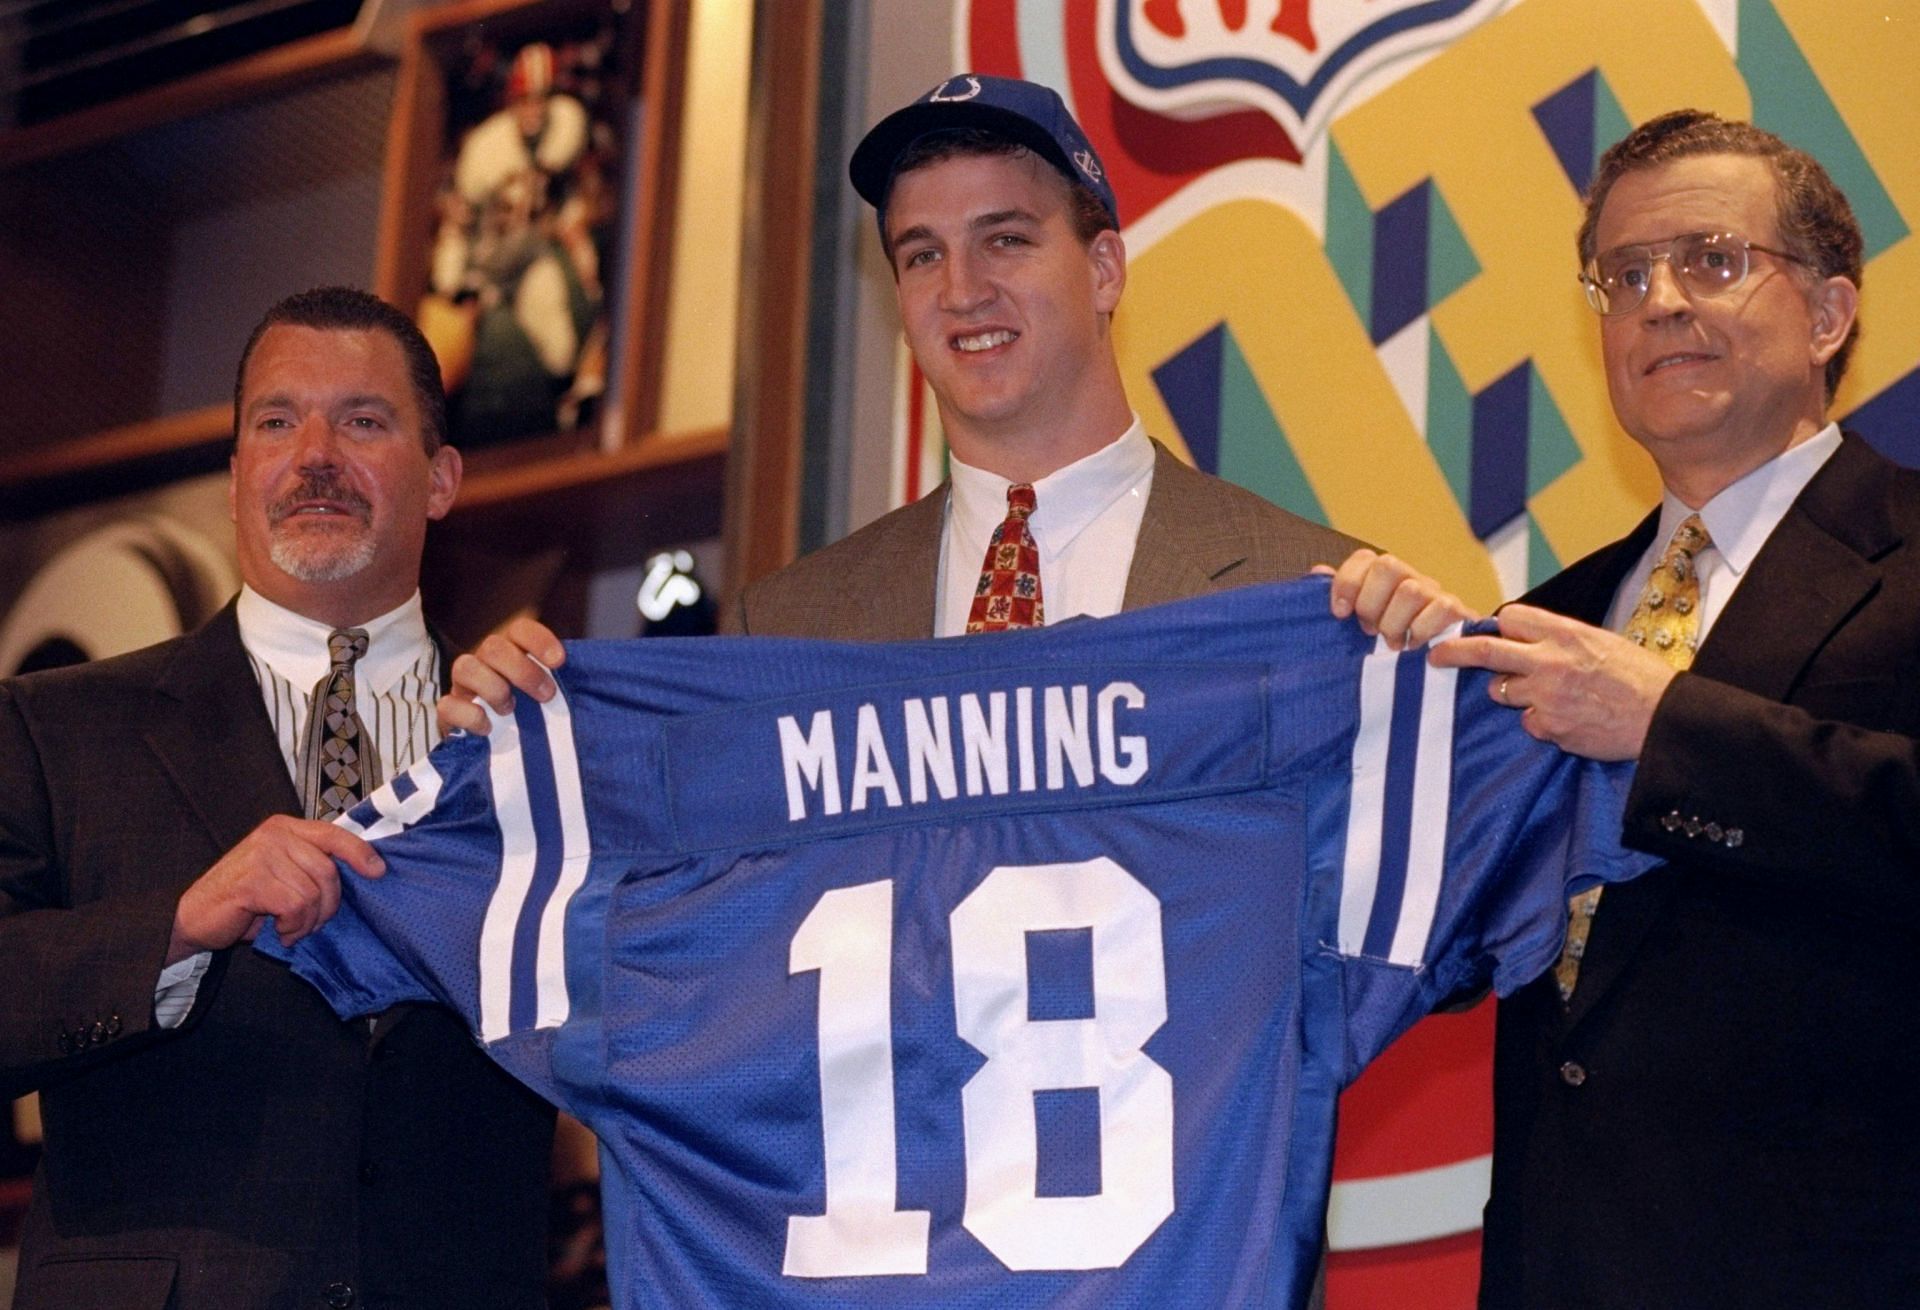 The 1998 NFL Draft introduces Peyton Manning to the world.